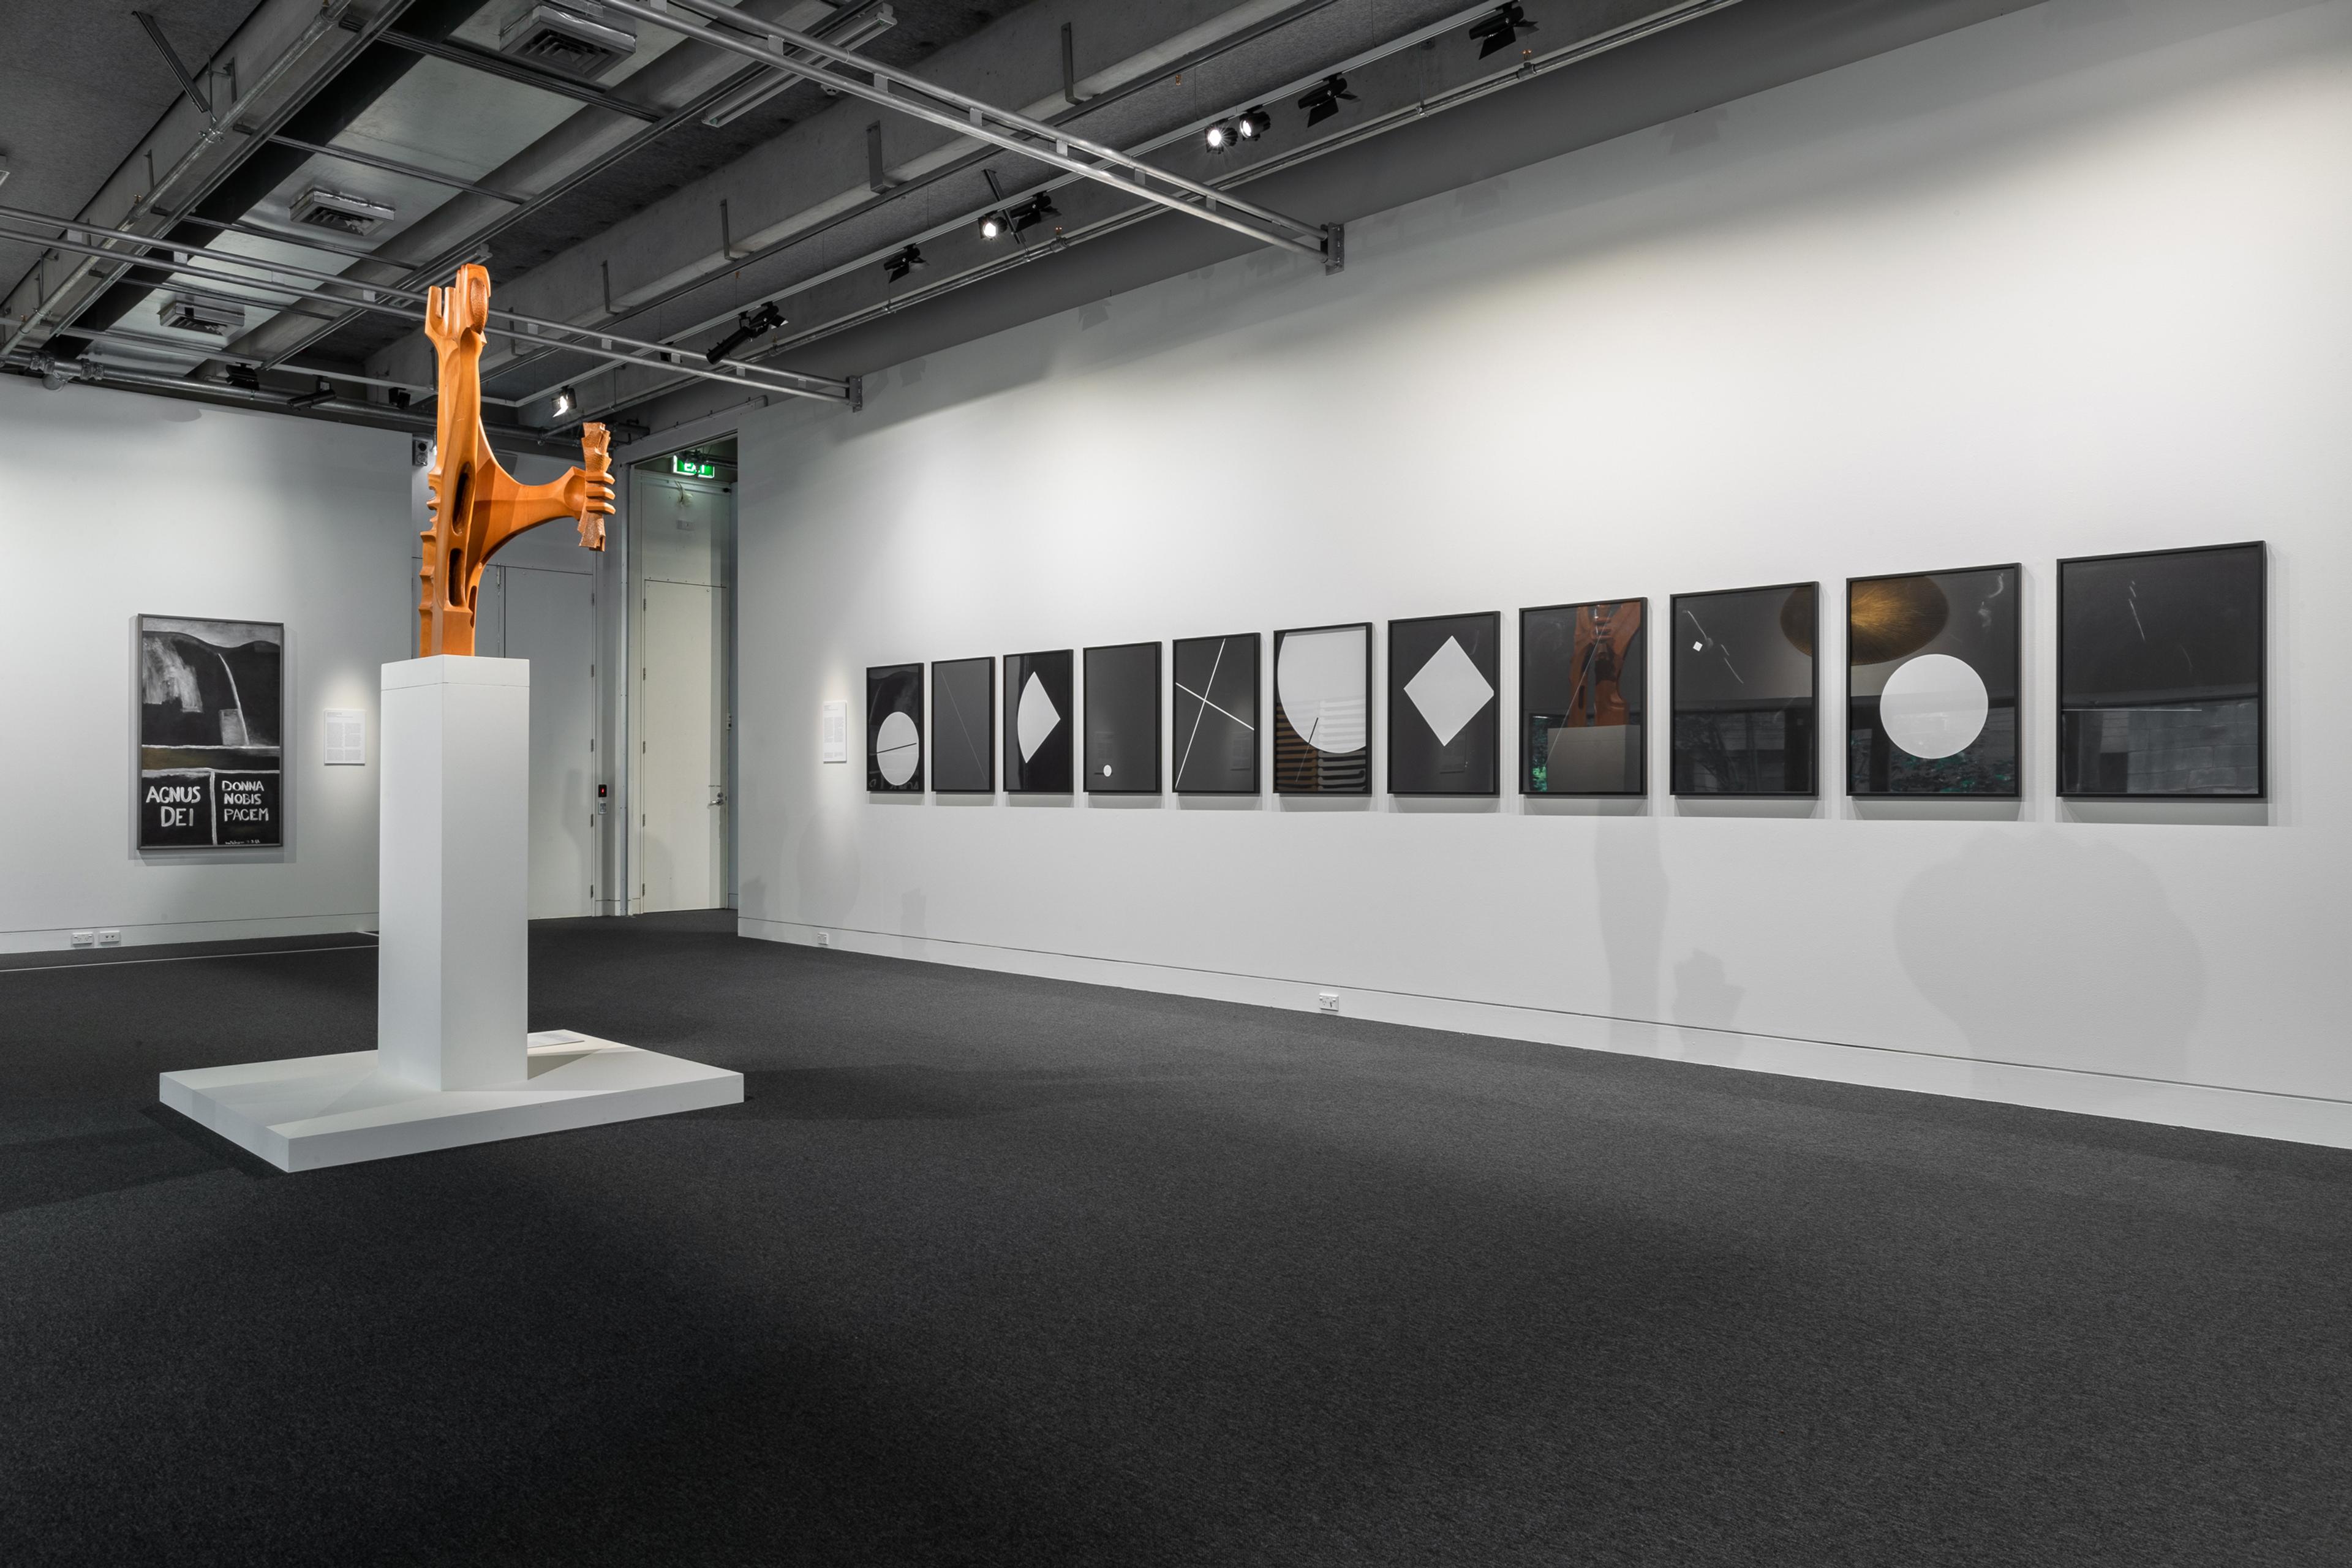 Installation view of 'In the Valley' an exhibition